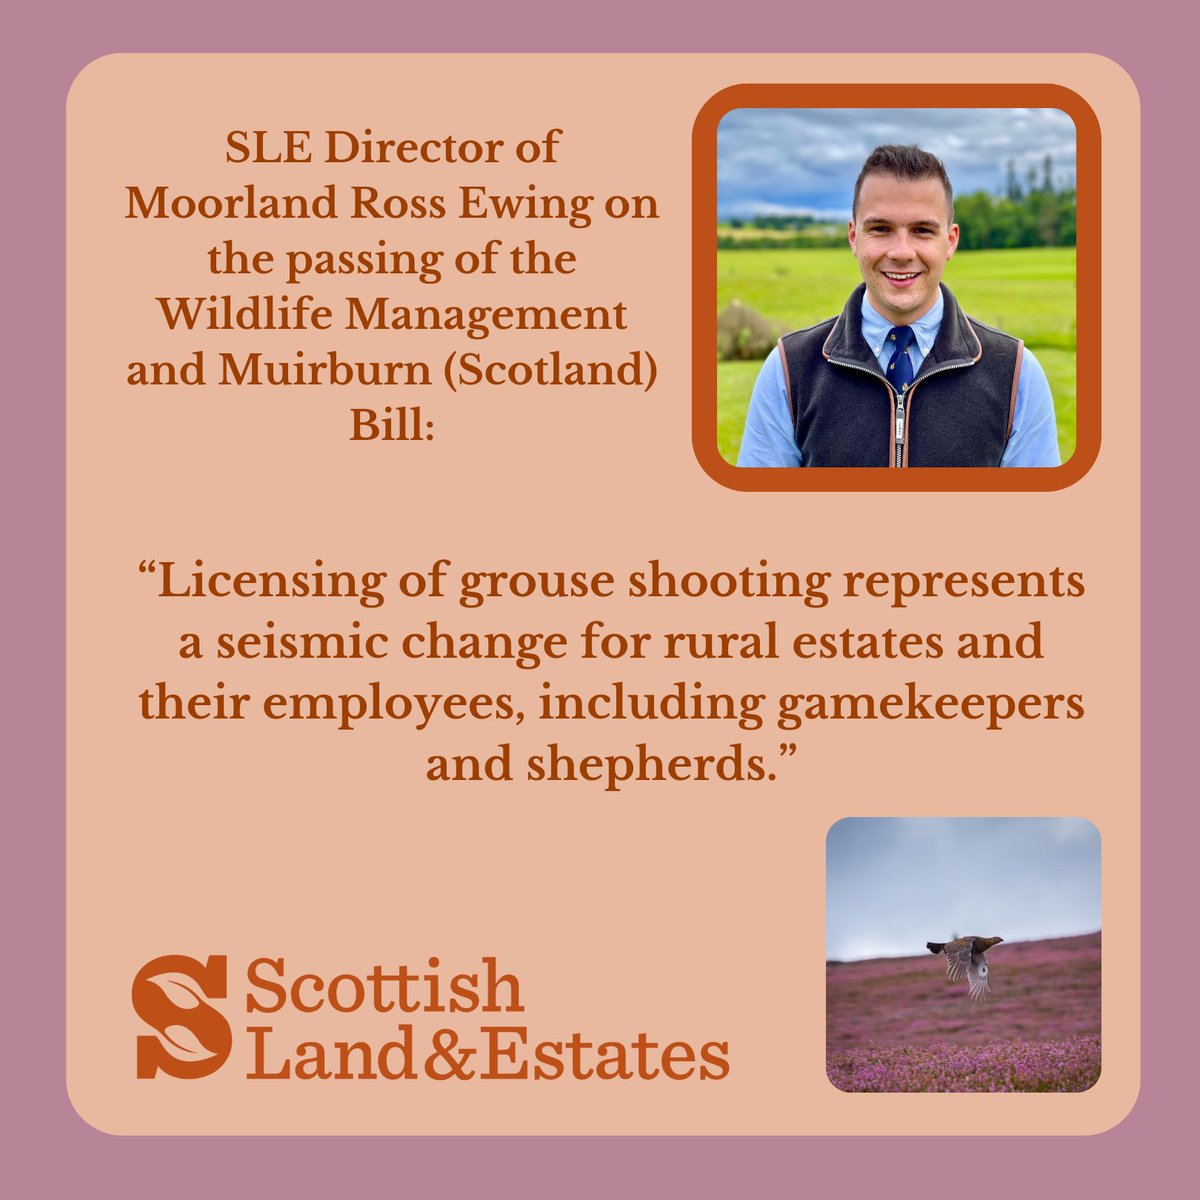 After over a year of scrutiny, the Wildlife Management and Muirburn (Scotland) Bill was passed in the Scottish Parliament this afternoon. Our Director of Moorland Ross Ewing, who has led SLE’s work with MSPs to help shape the Bill, has released a statement.